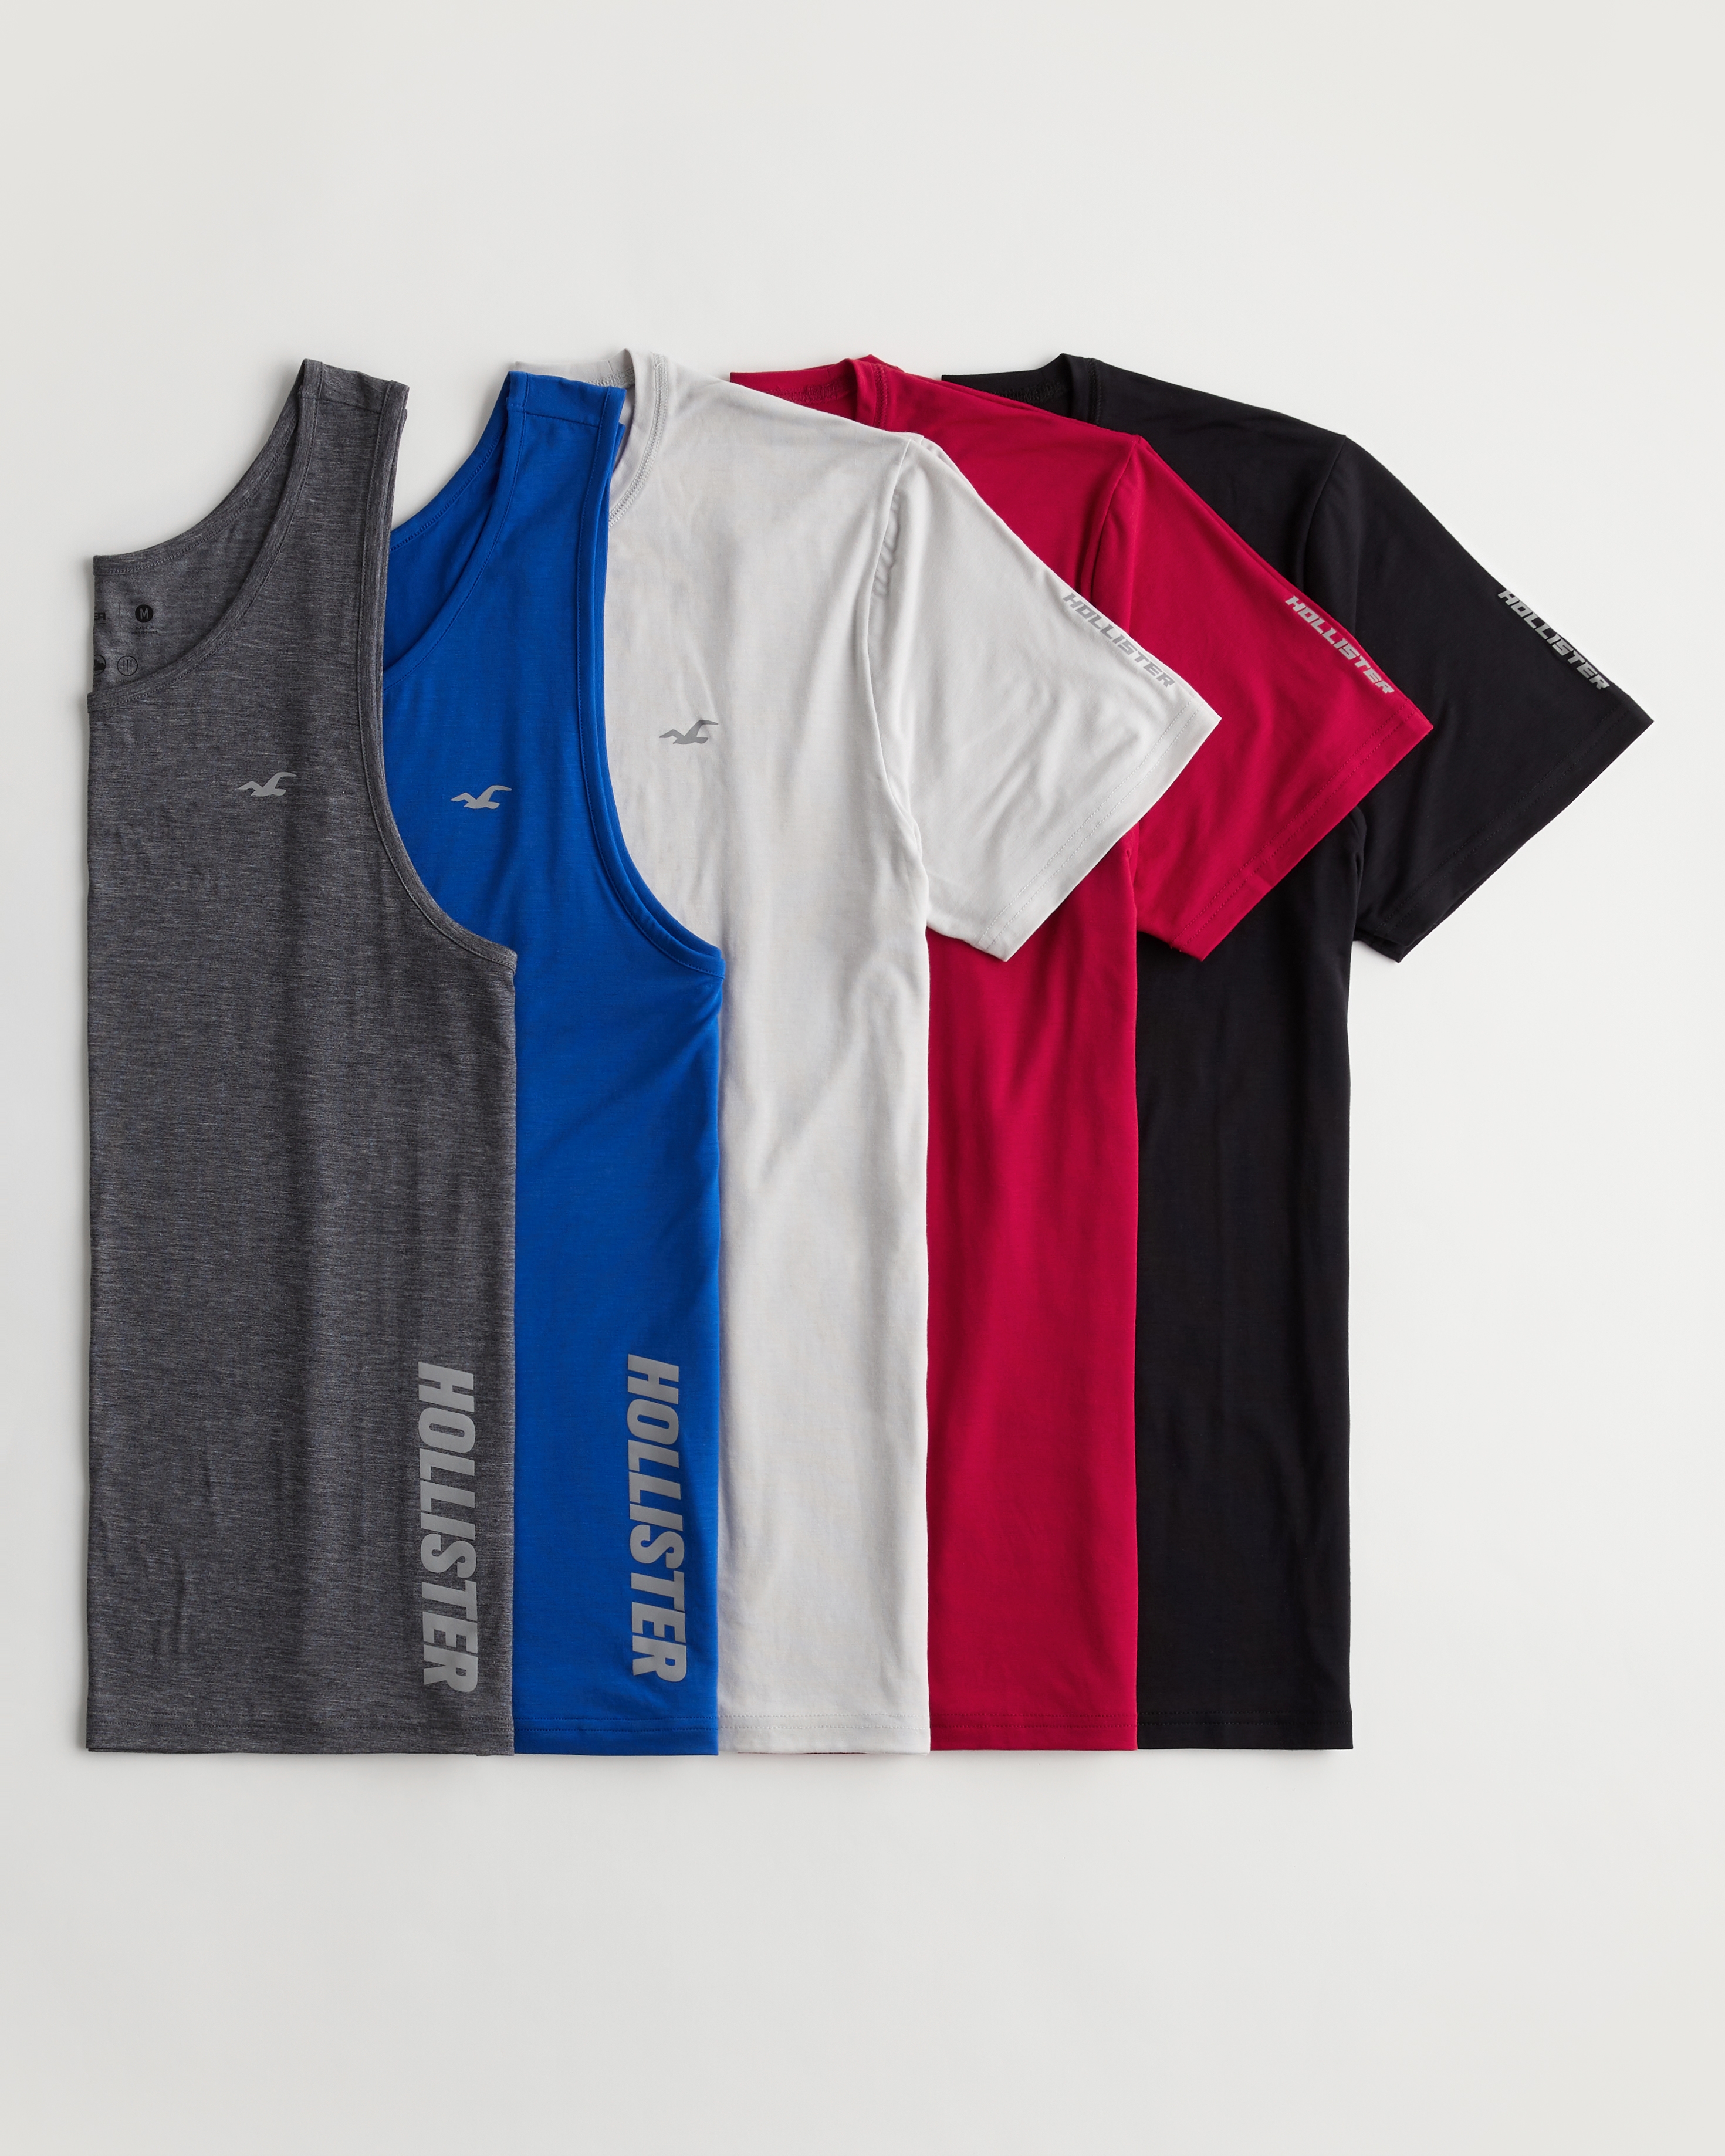 NWT HOLLISTER Men SPORT KNIT GRAPHIC Tanks, YOUR CHOICE